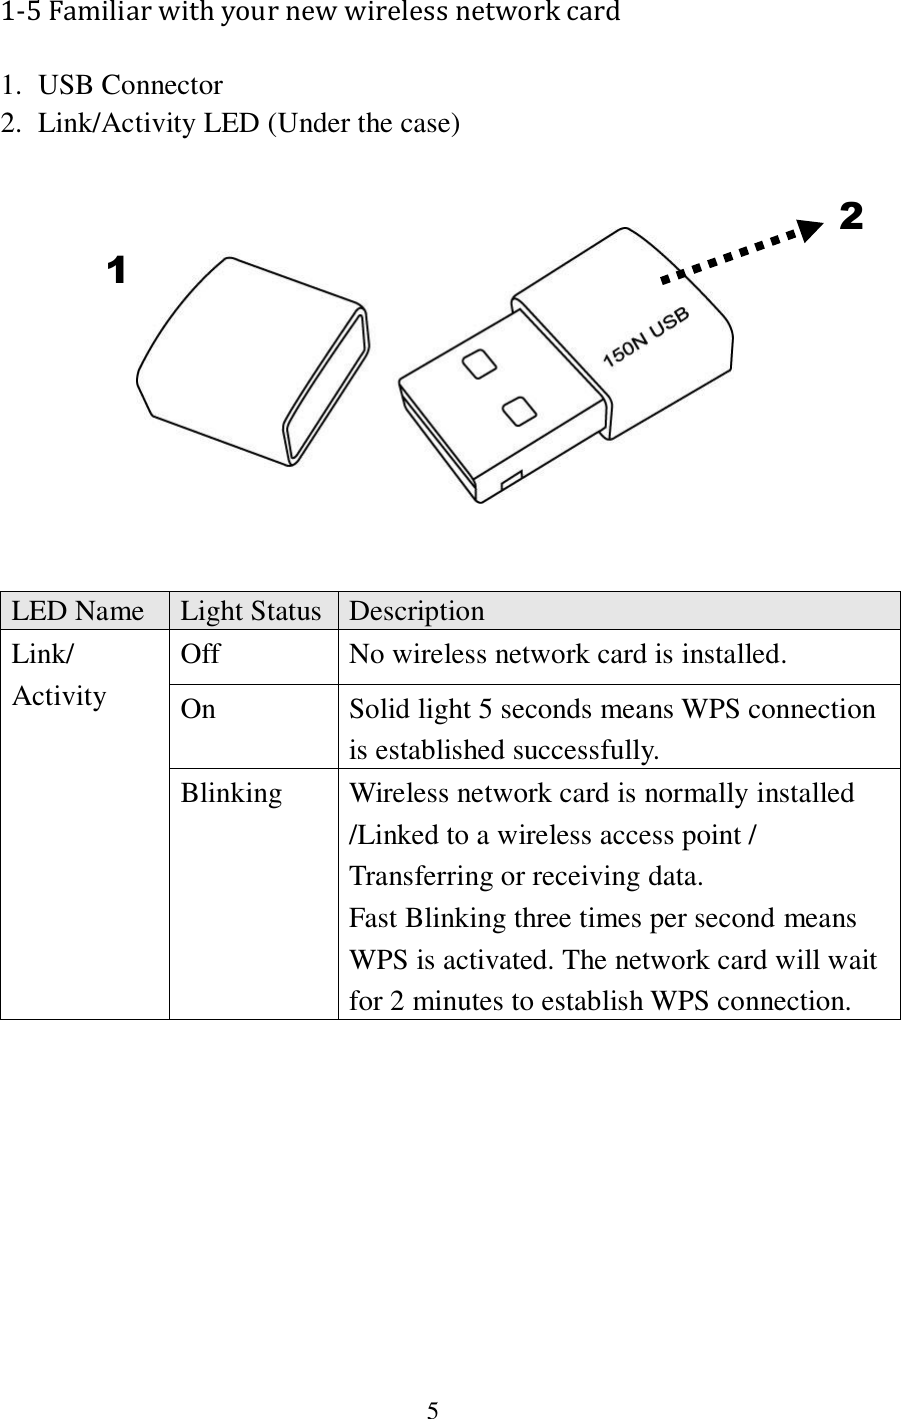 5  1-5 Familiar with your new wireless network card 1. USB Connector 2. Link/Activity LED (Under the case)      LED Name Light Status Description Link/ Activity Off No wireless network card is installed. On Solid light 5 seconds means WPS connection is established successfully. Blinking Wireless network card is normally installed /Linked to a wireless access point / Transferring or receiving data. Fast Blinking three times per second means WPS is activated. The network card will wait for 2 minutes to establish WPS connection.   1 2 